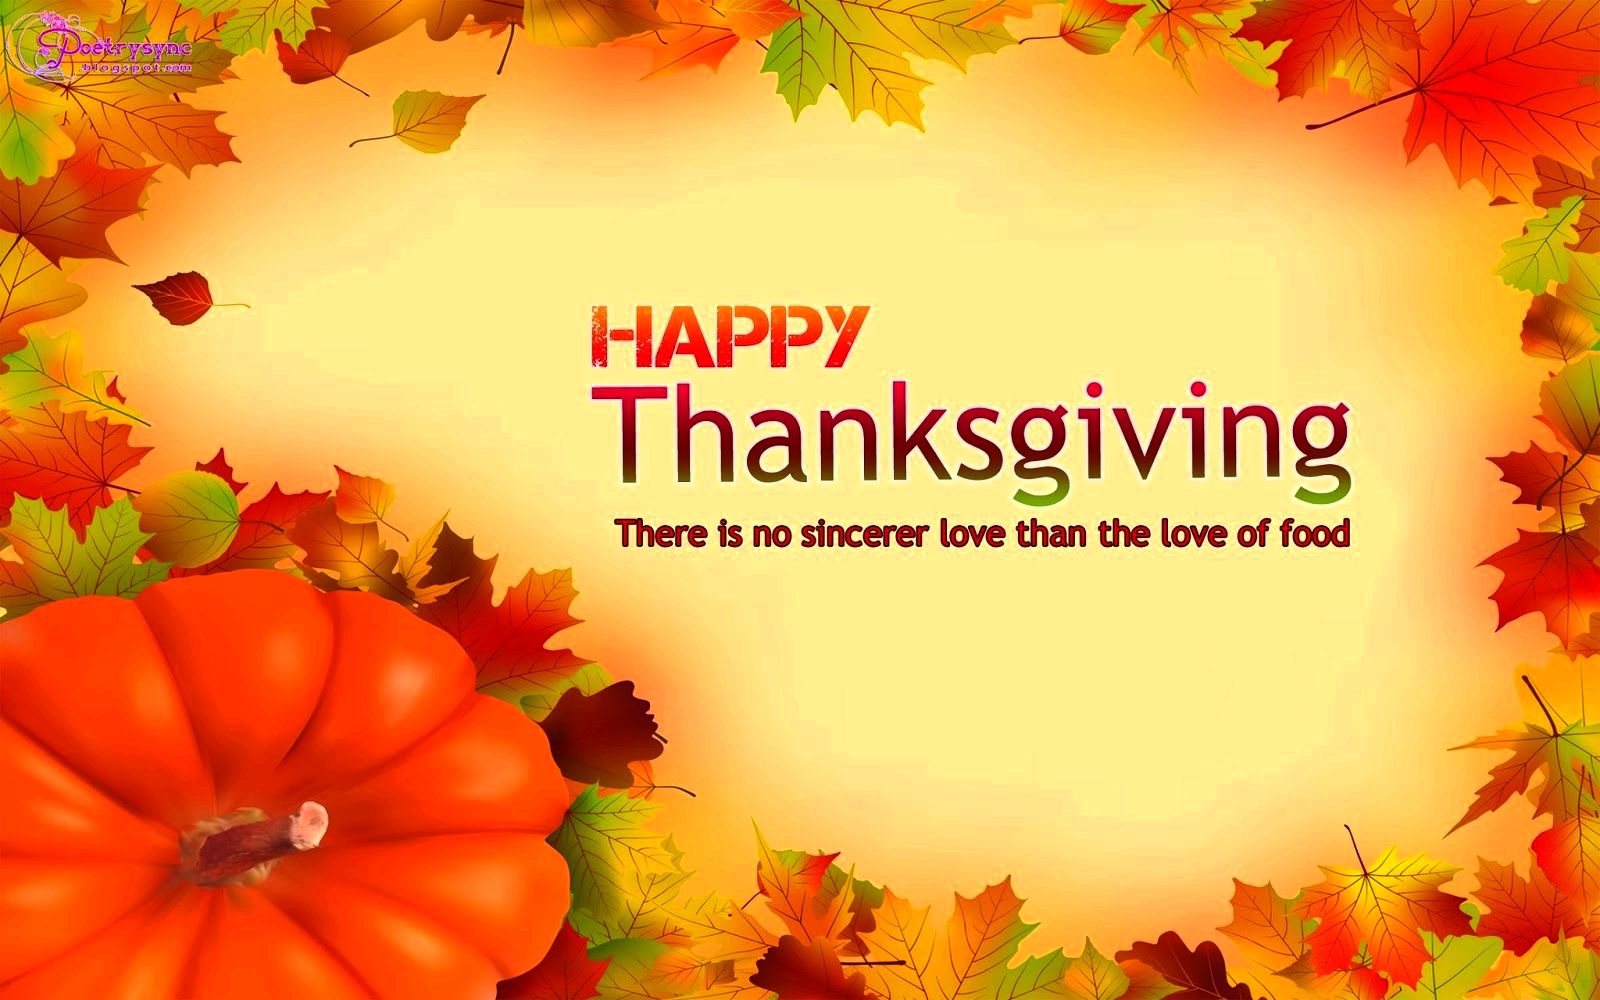 Thanksgiving day whatsapp messages & status - thanksgiving whatsapp messages & status and also the leaves